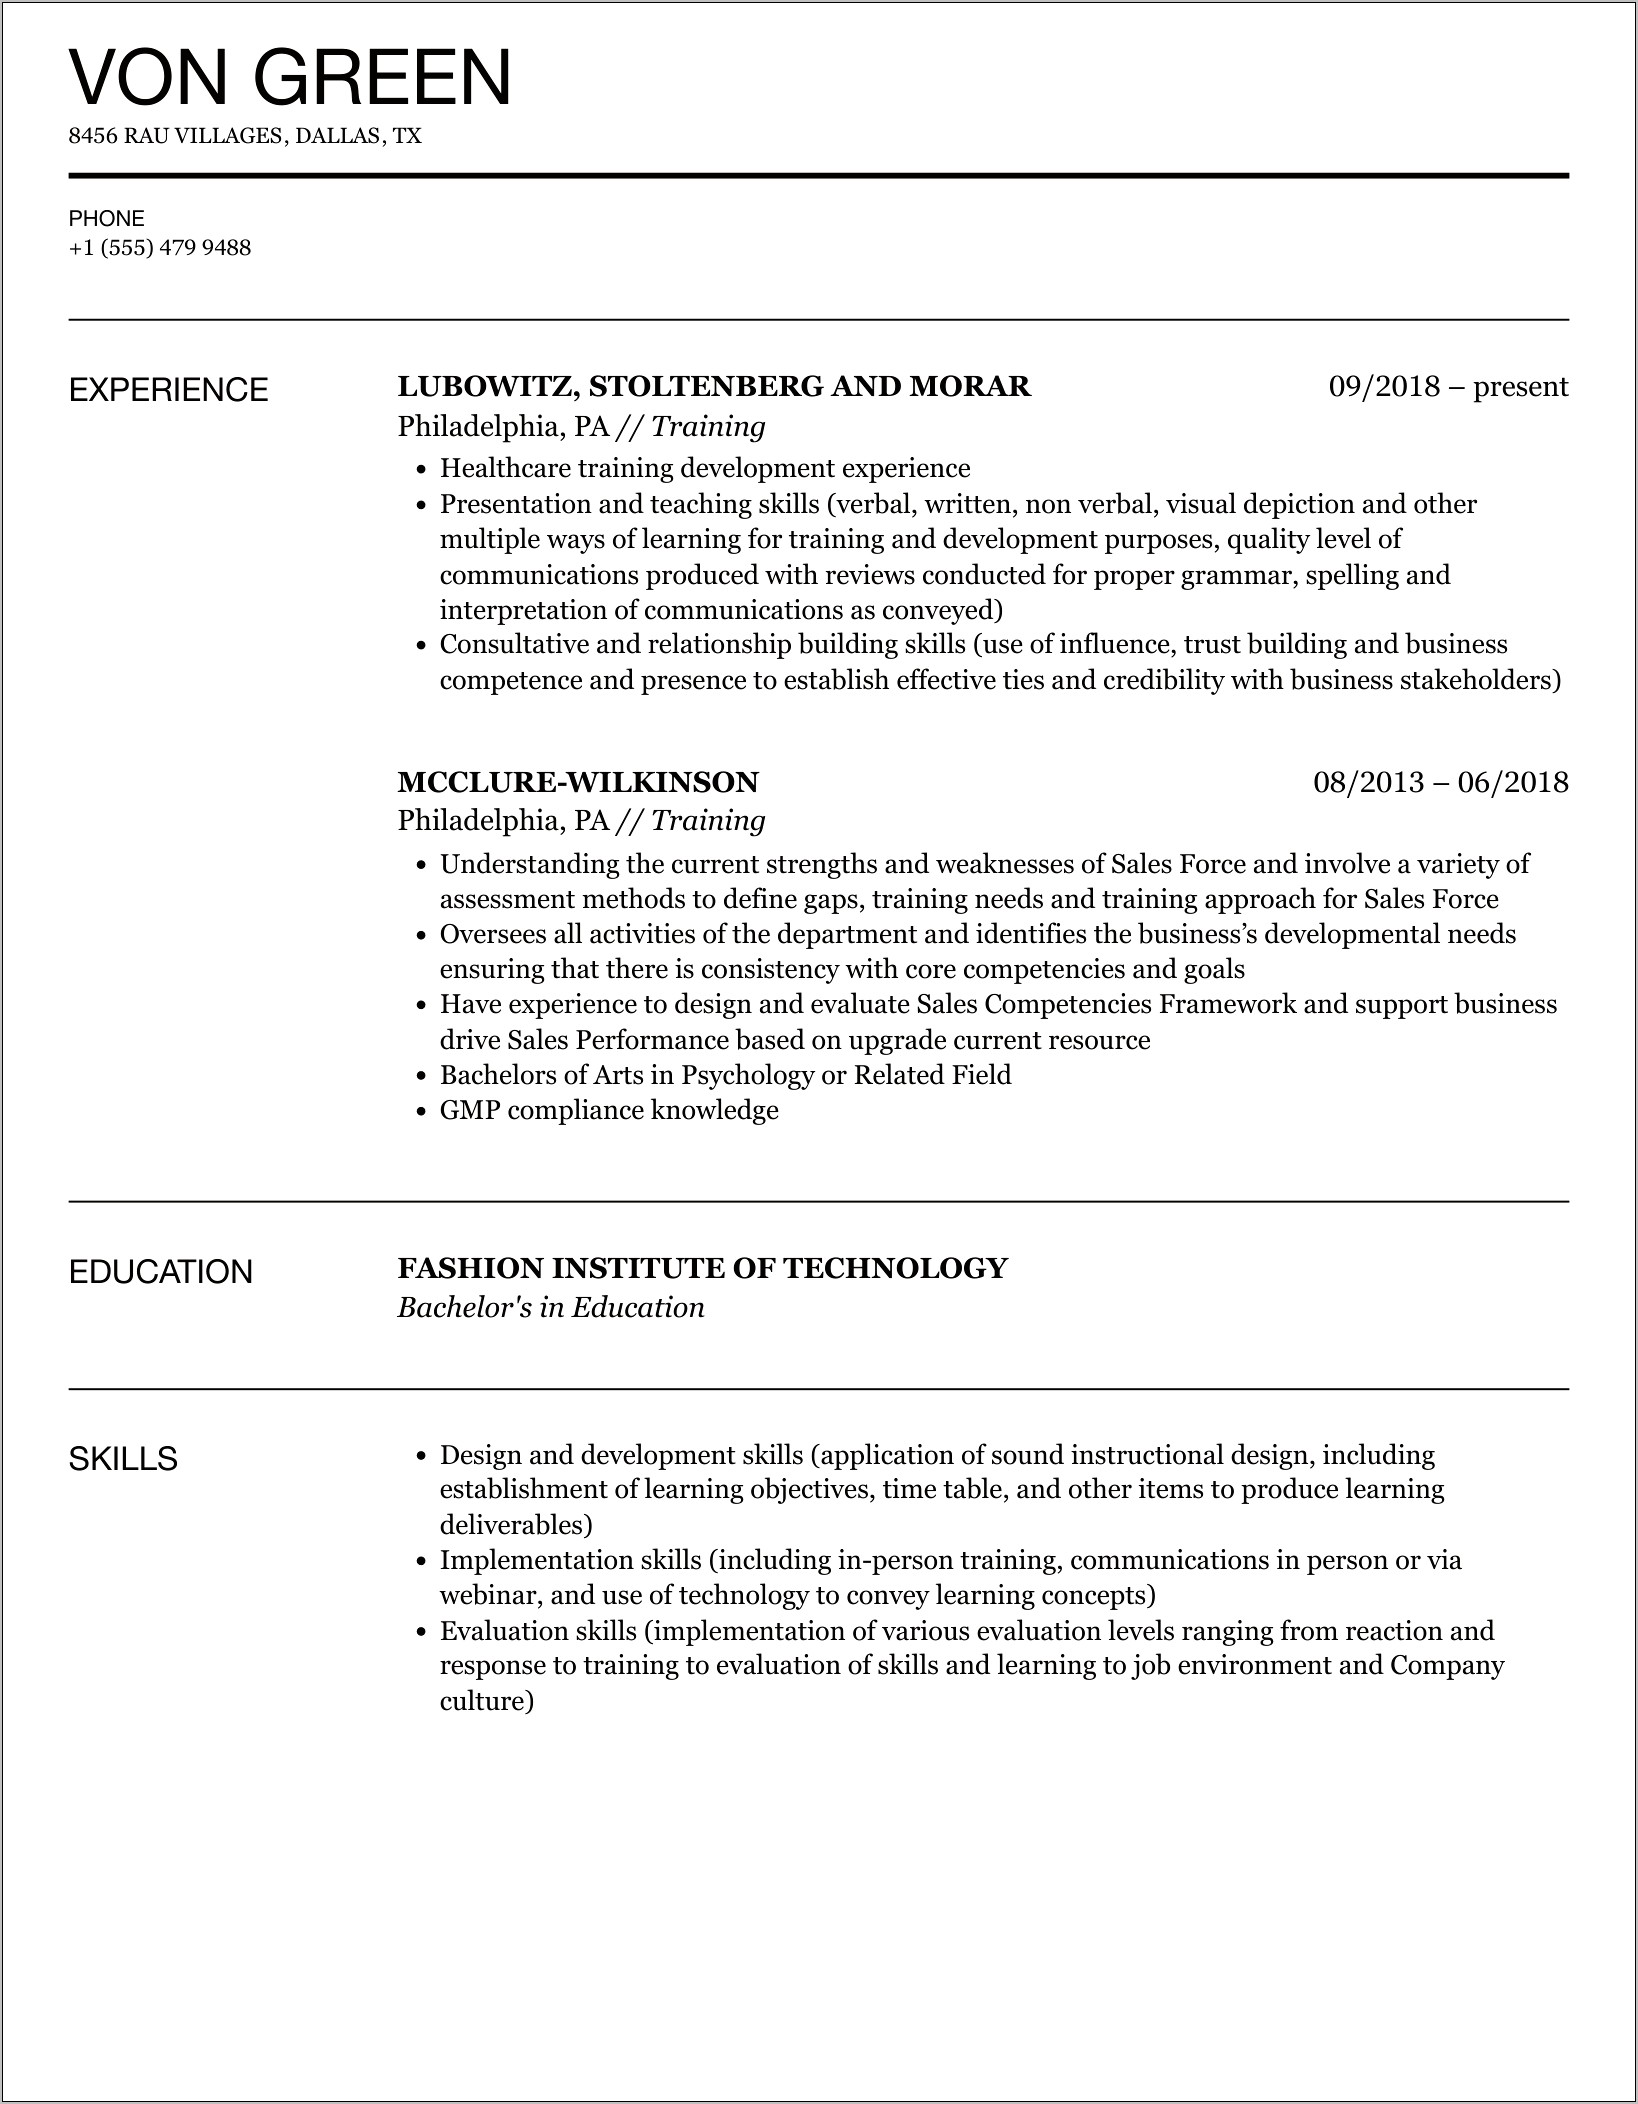 Resume Special Skills And Training